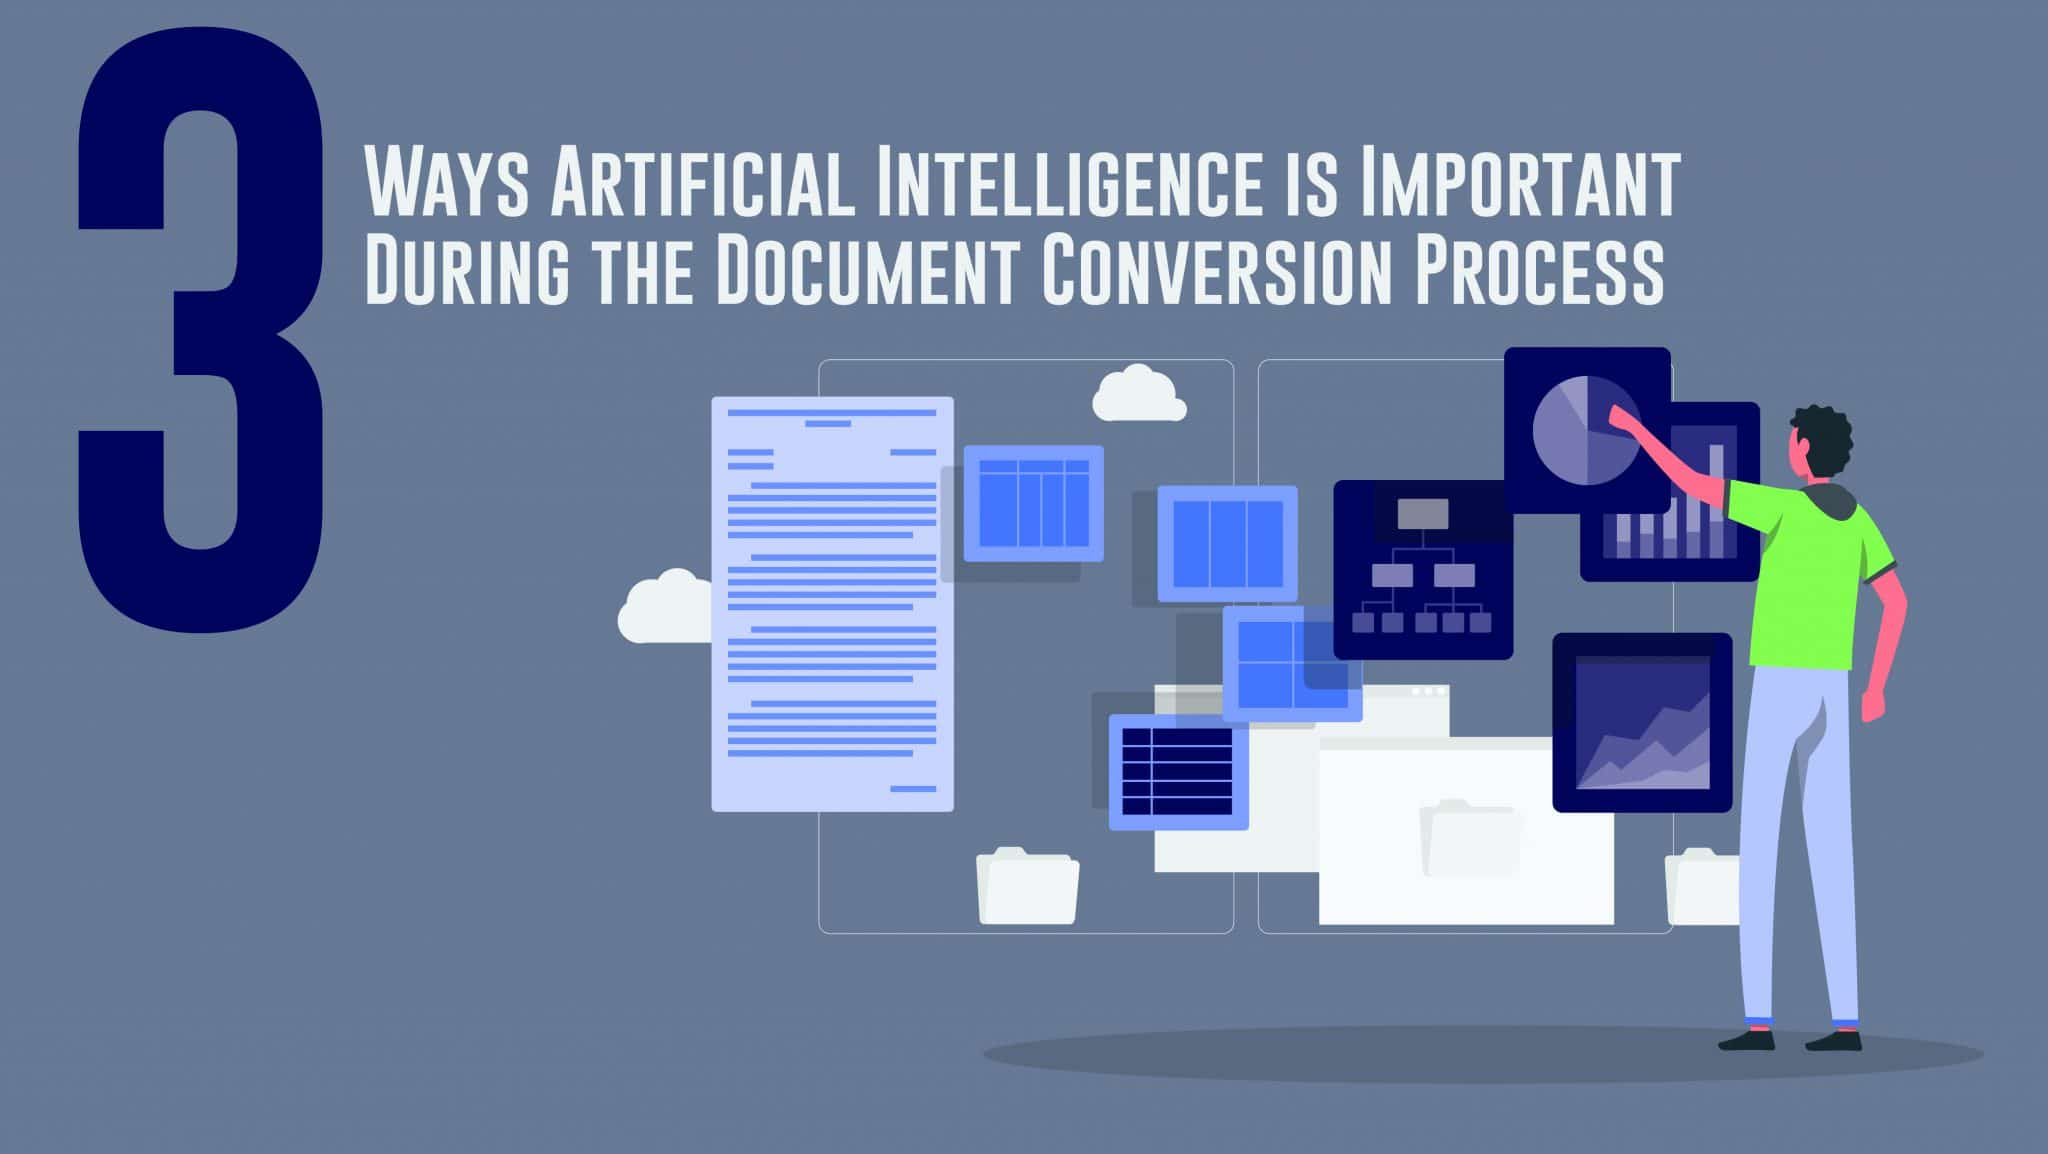 3 Ways AI is used in Document Conversion